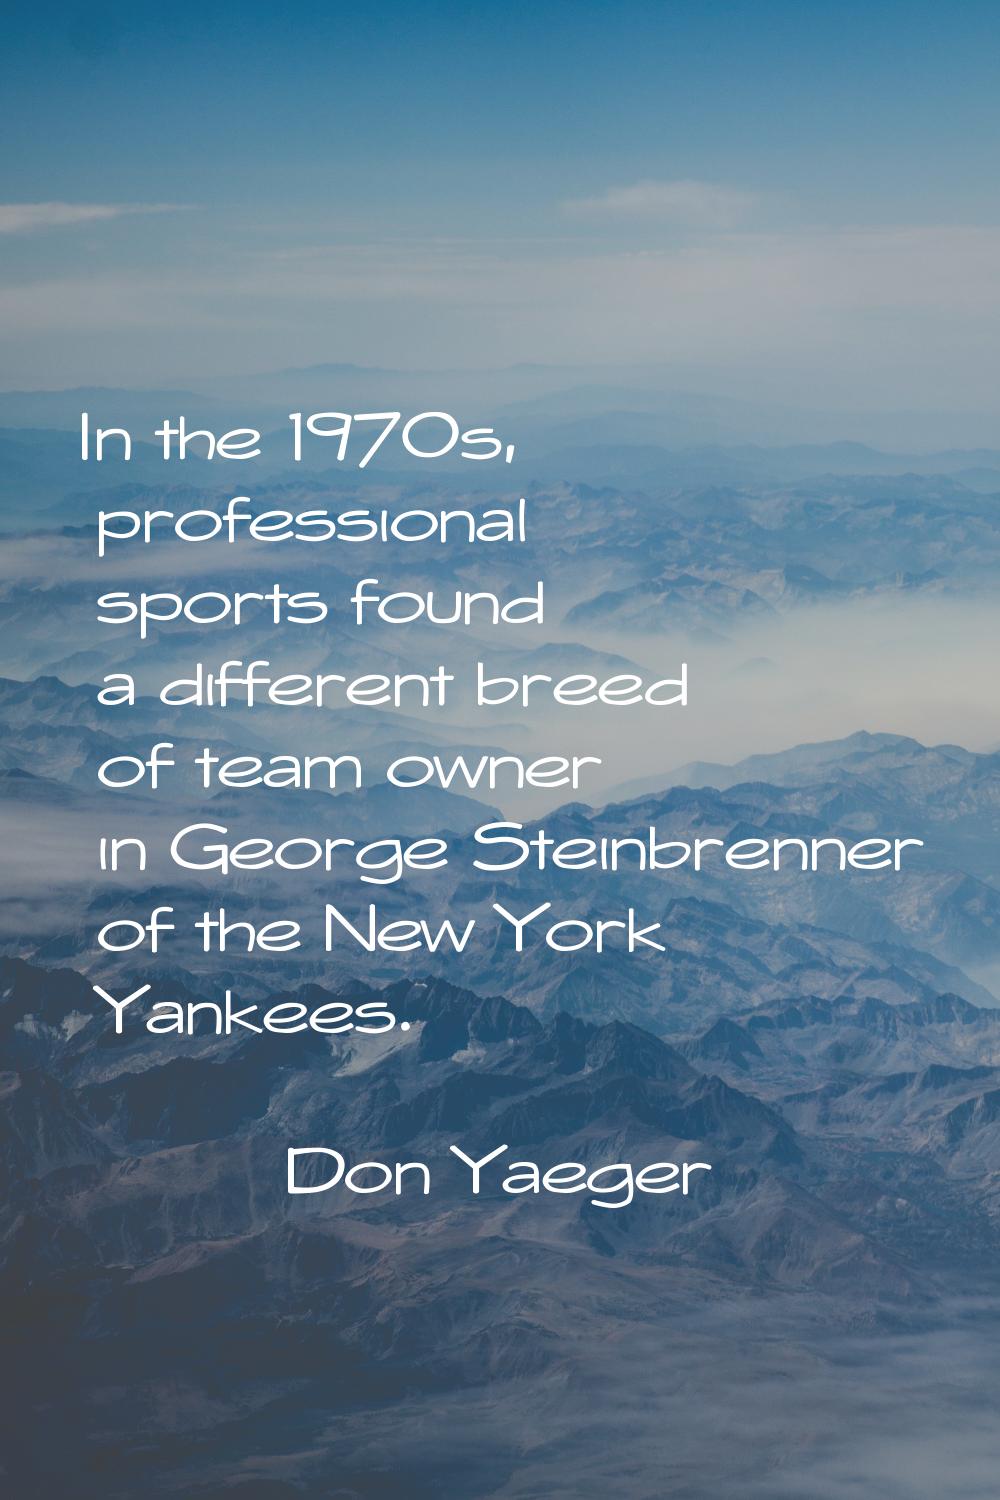 In the 1970s, professional sports found a different breed of team owner in George Steinbrenner of t